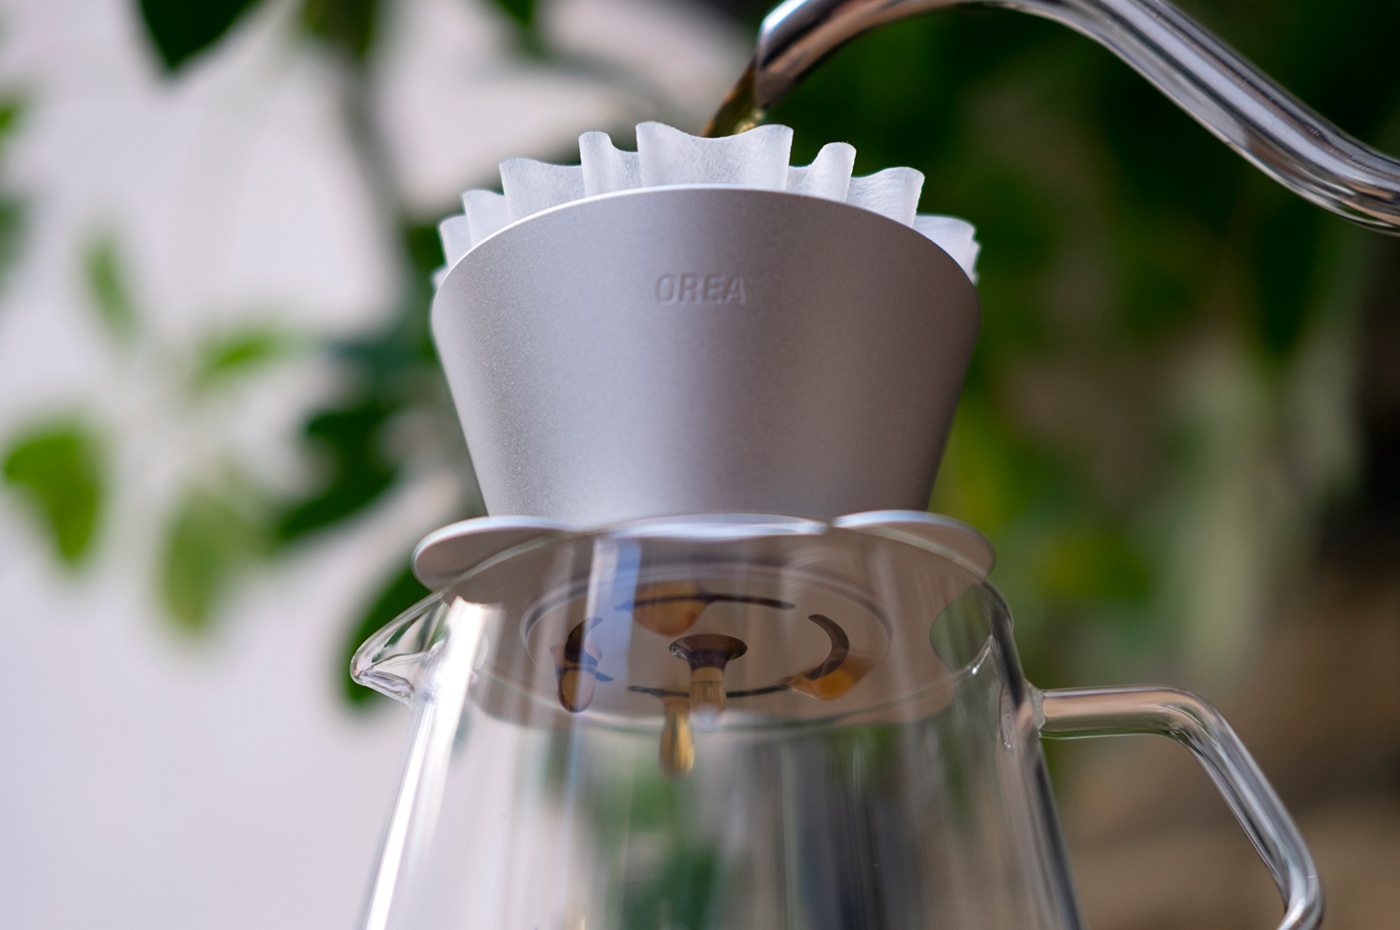 brewer cafe Coffee coffee brewer dripper industrialdesign PHYSICAL PRODUCT DESIGN productdesign UIDO DESIGN Coffee dripper